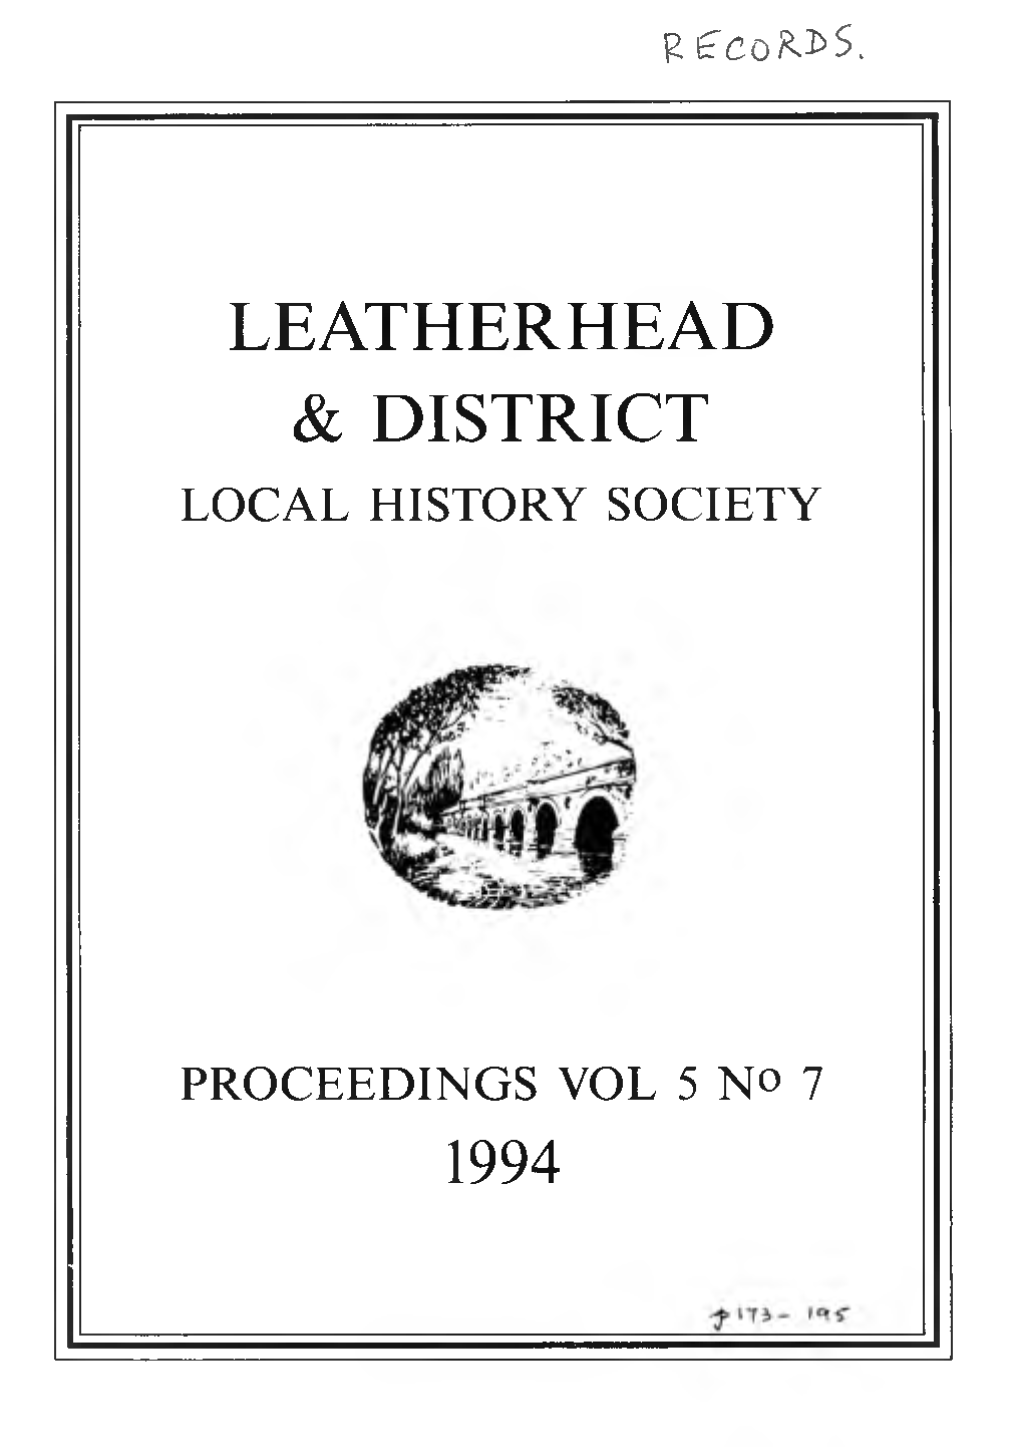 Leatherhead & District Local History Society Archive